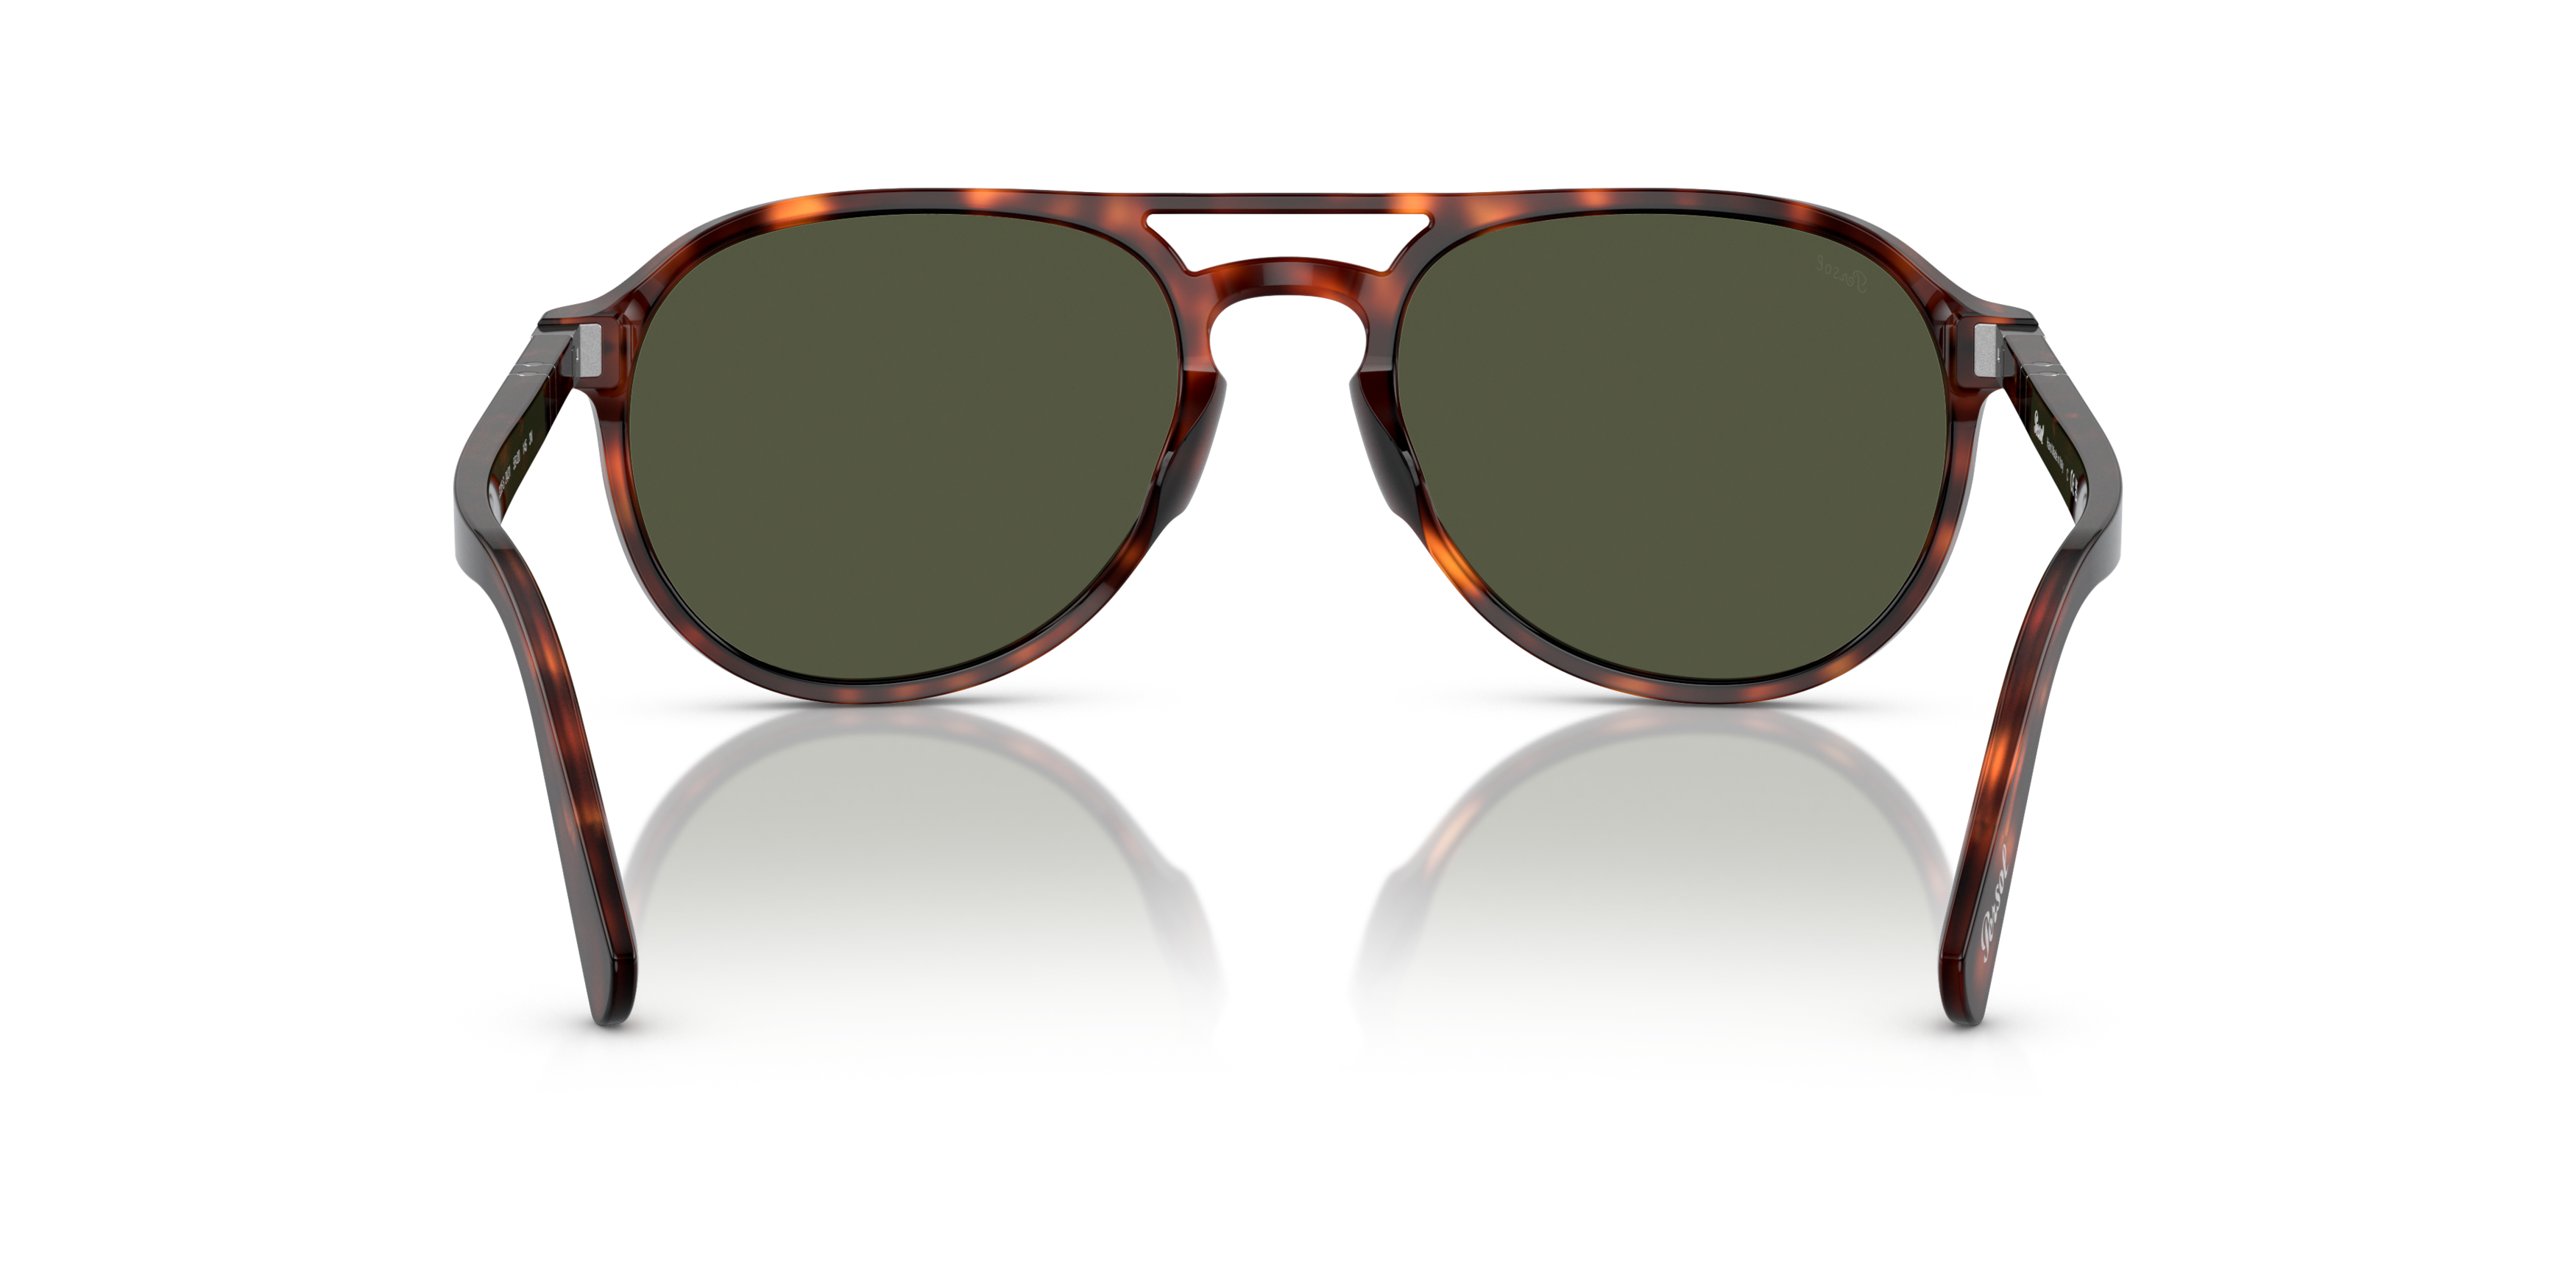 [products.image.detail02] PERSOL PO3235S 24/31